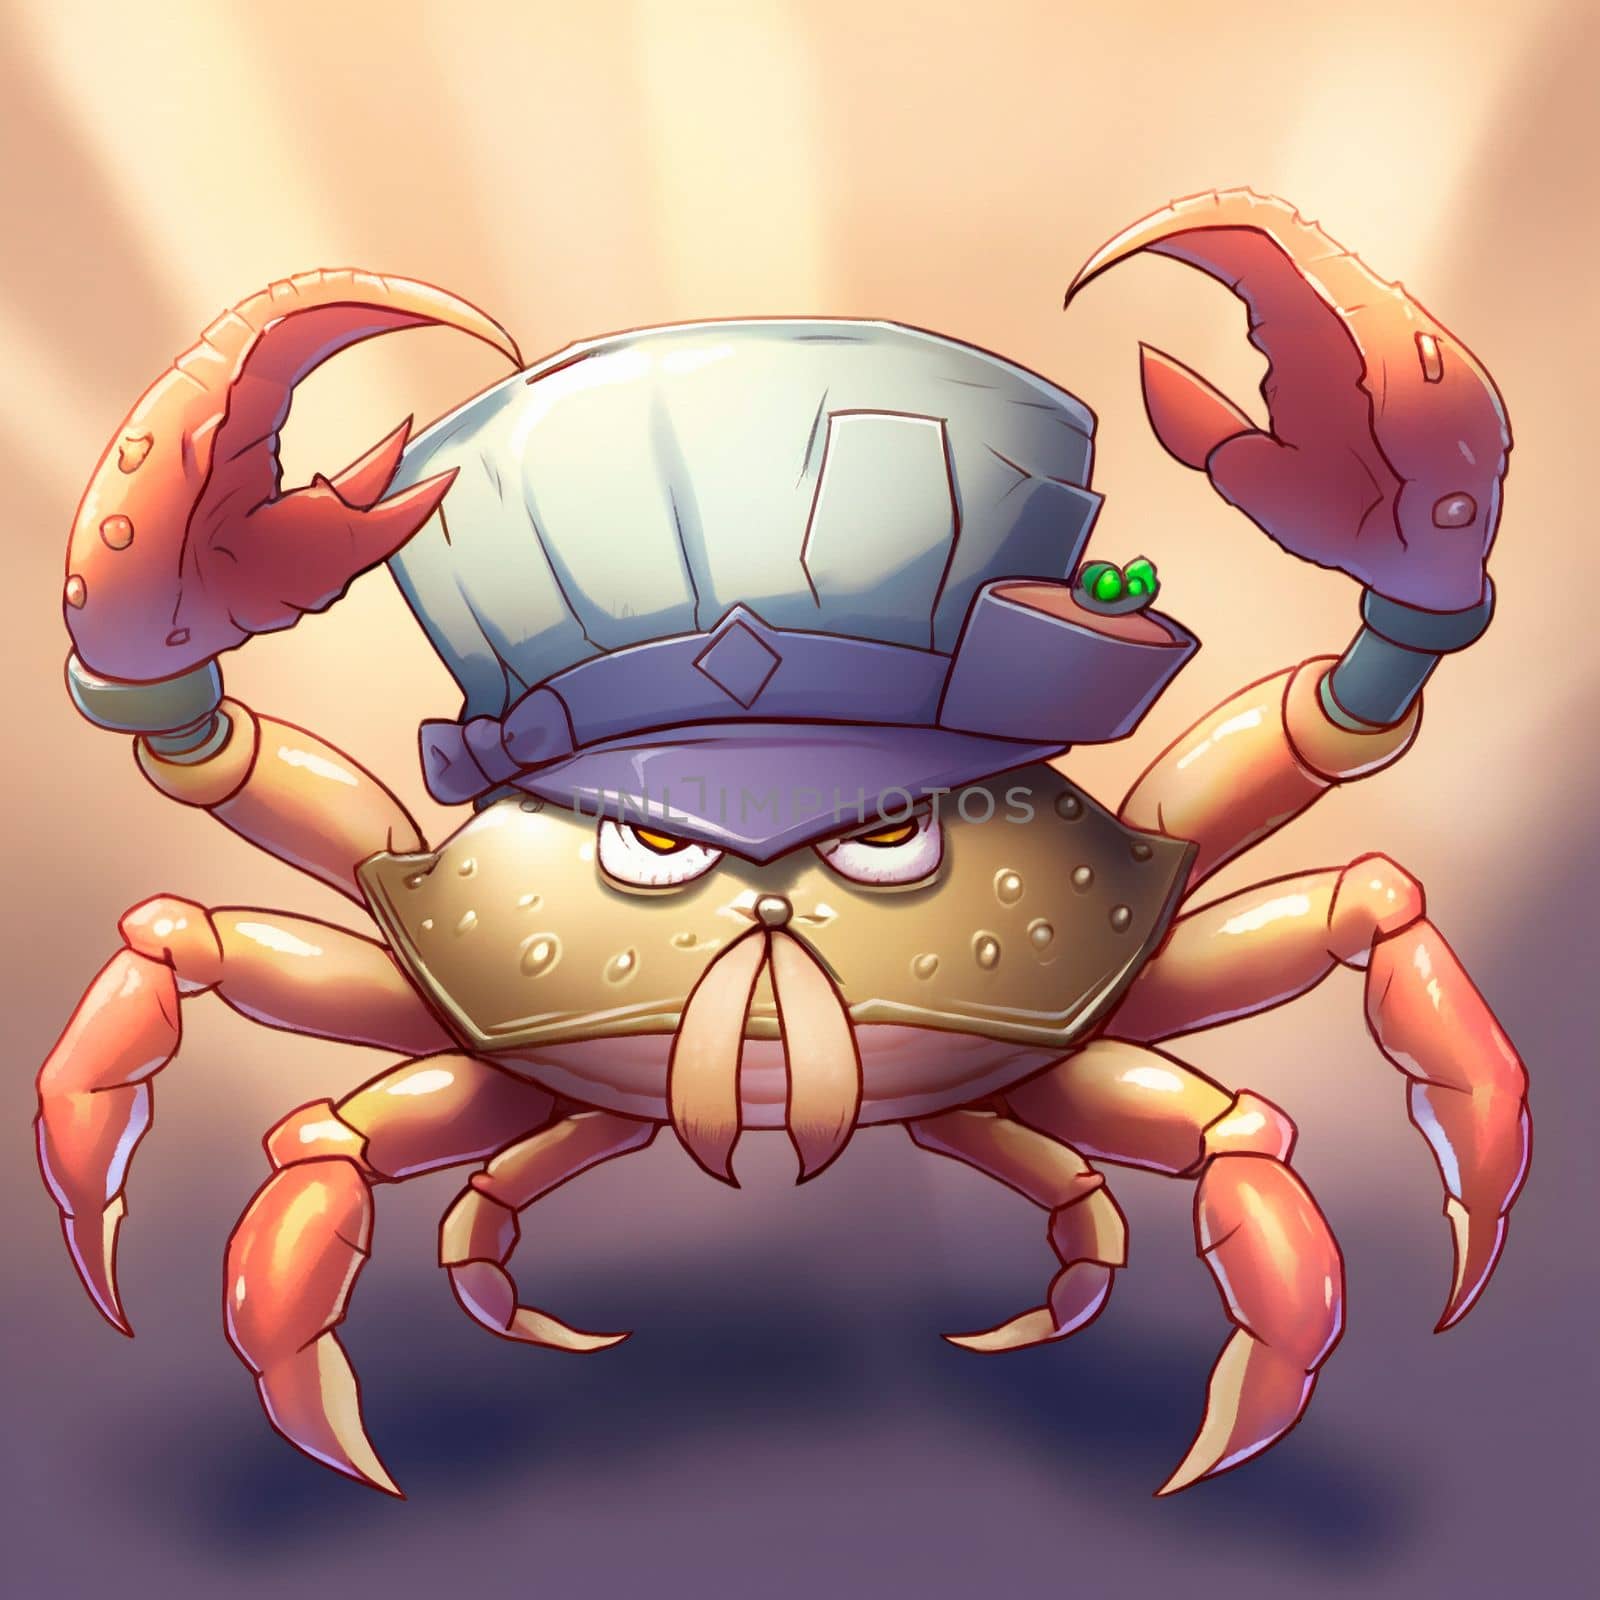 Crab in a hat. High quality illustration